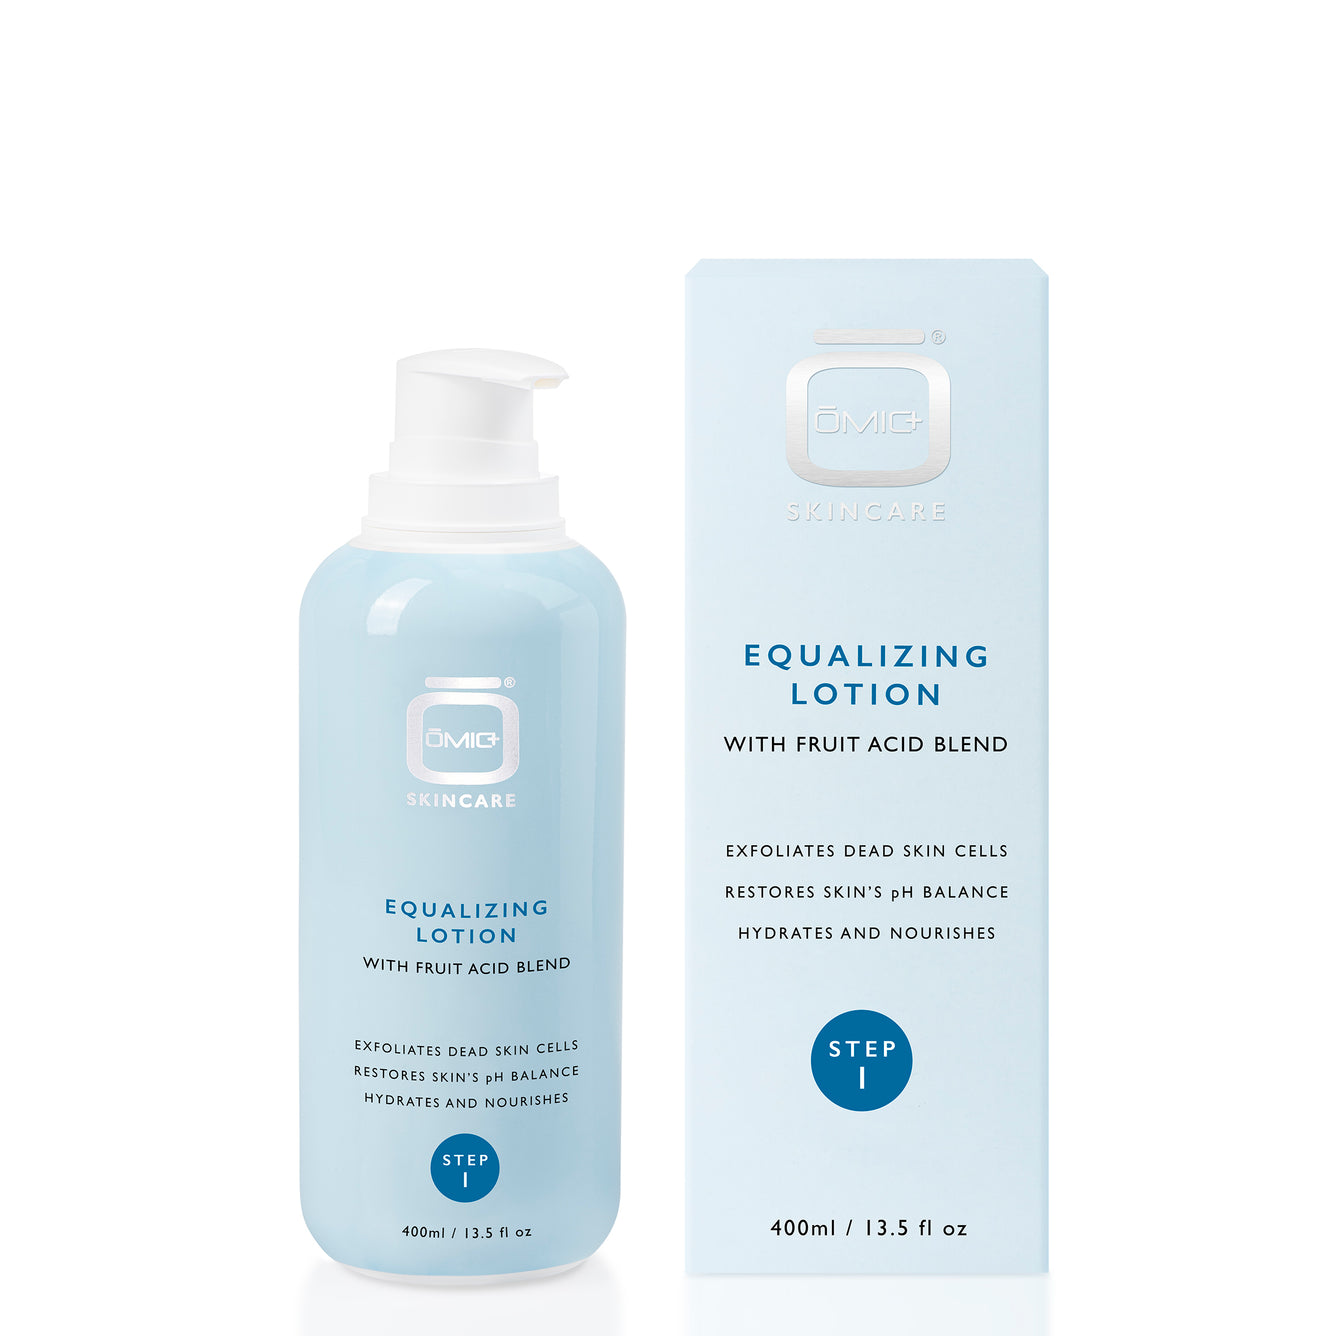 Omic+ Equilizing lotion -400ml - Step 1 Mitchell Brands - Mitchell Brands - Skin Lightening, Skin Brightening, Fade Dark Spots, Shea Butter, Hair Growth Products